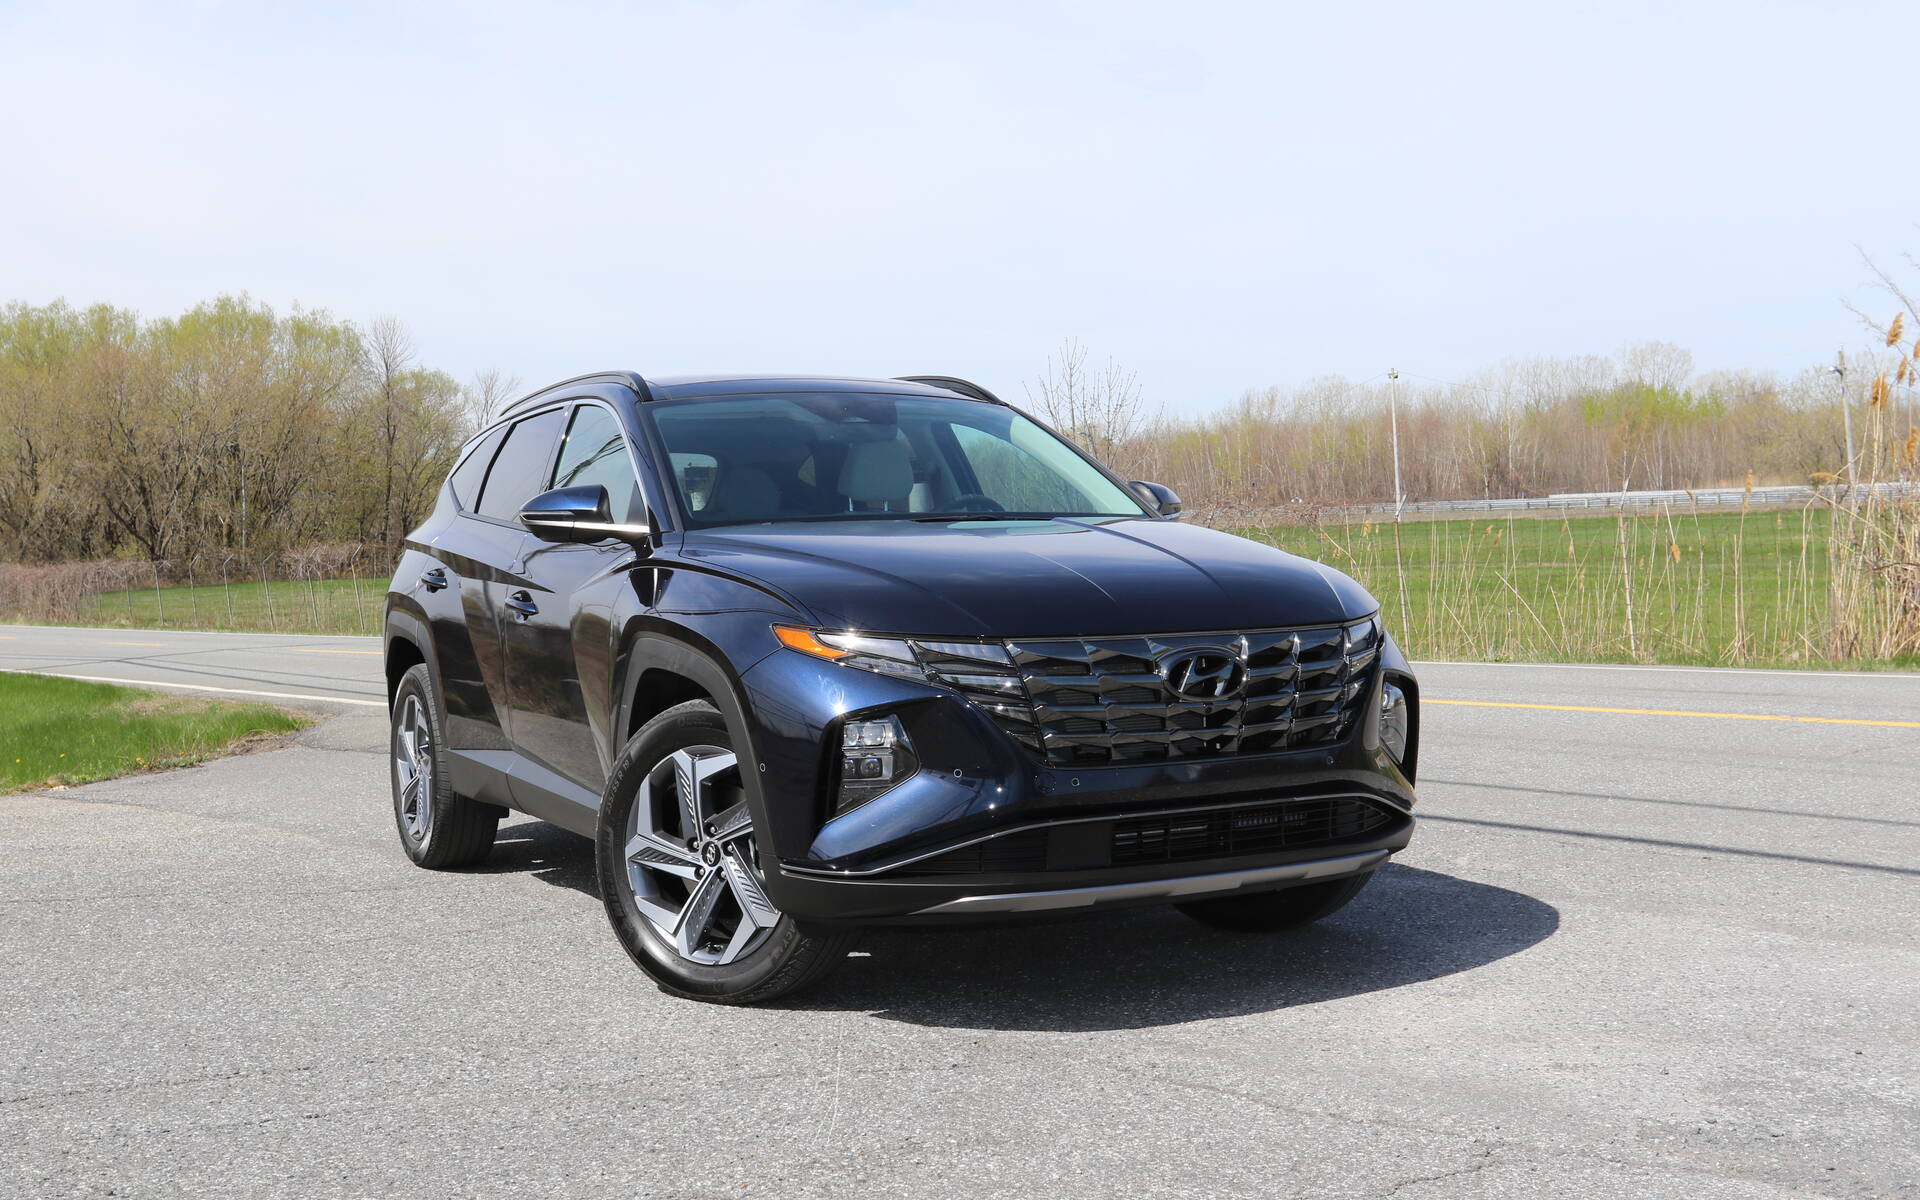 2022 Hyundai Tucson: Exciting But Not Super-efficient - The Car Guide